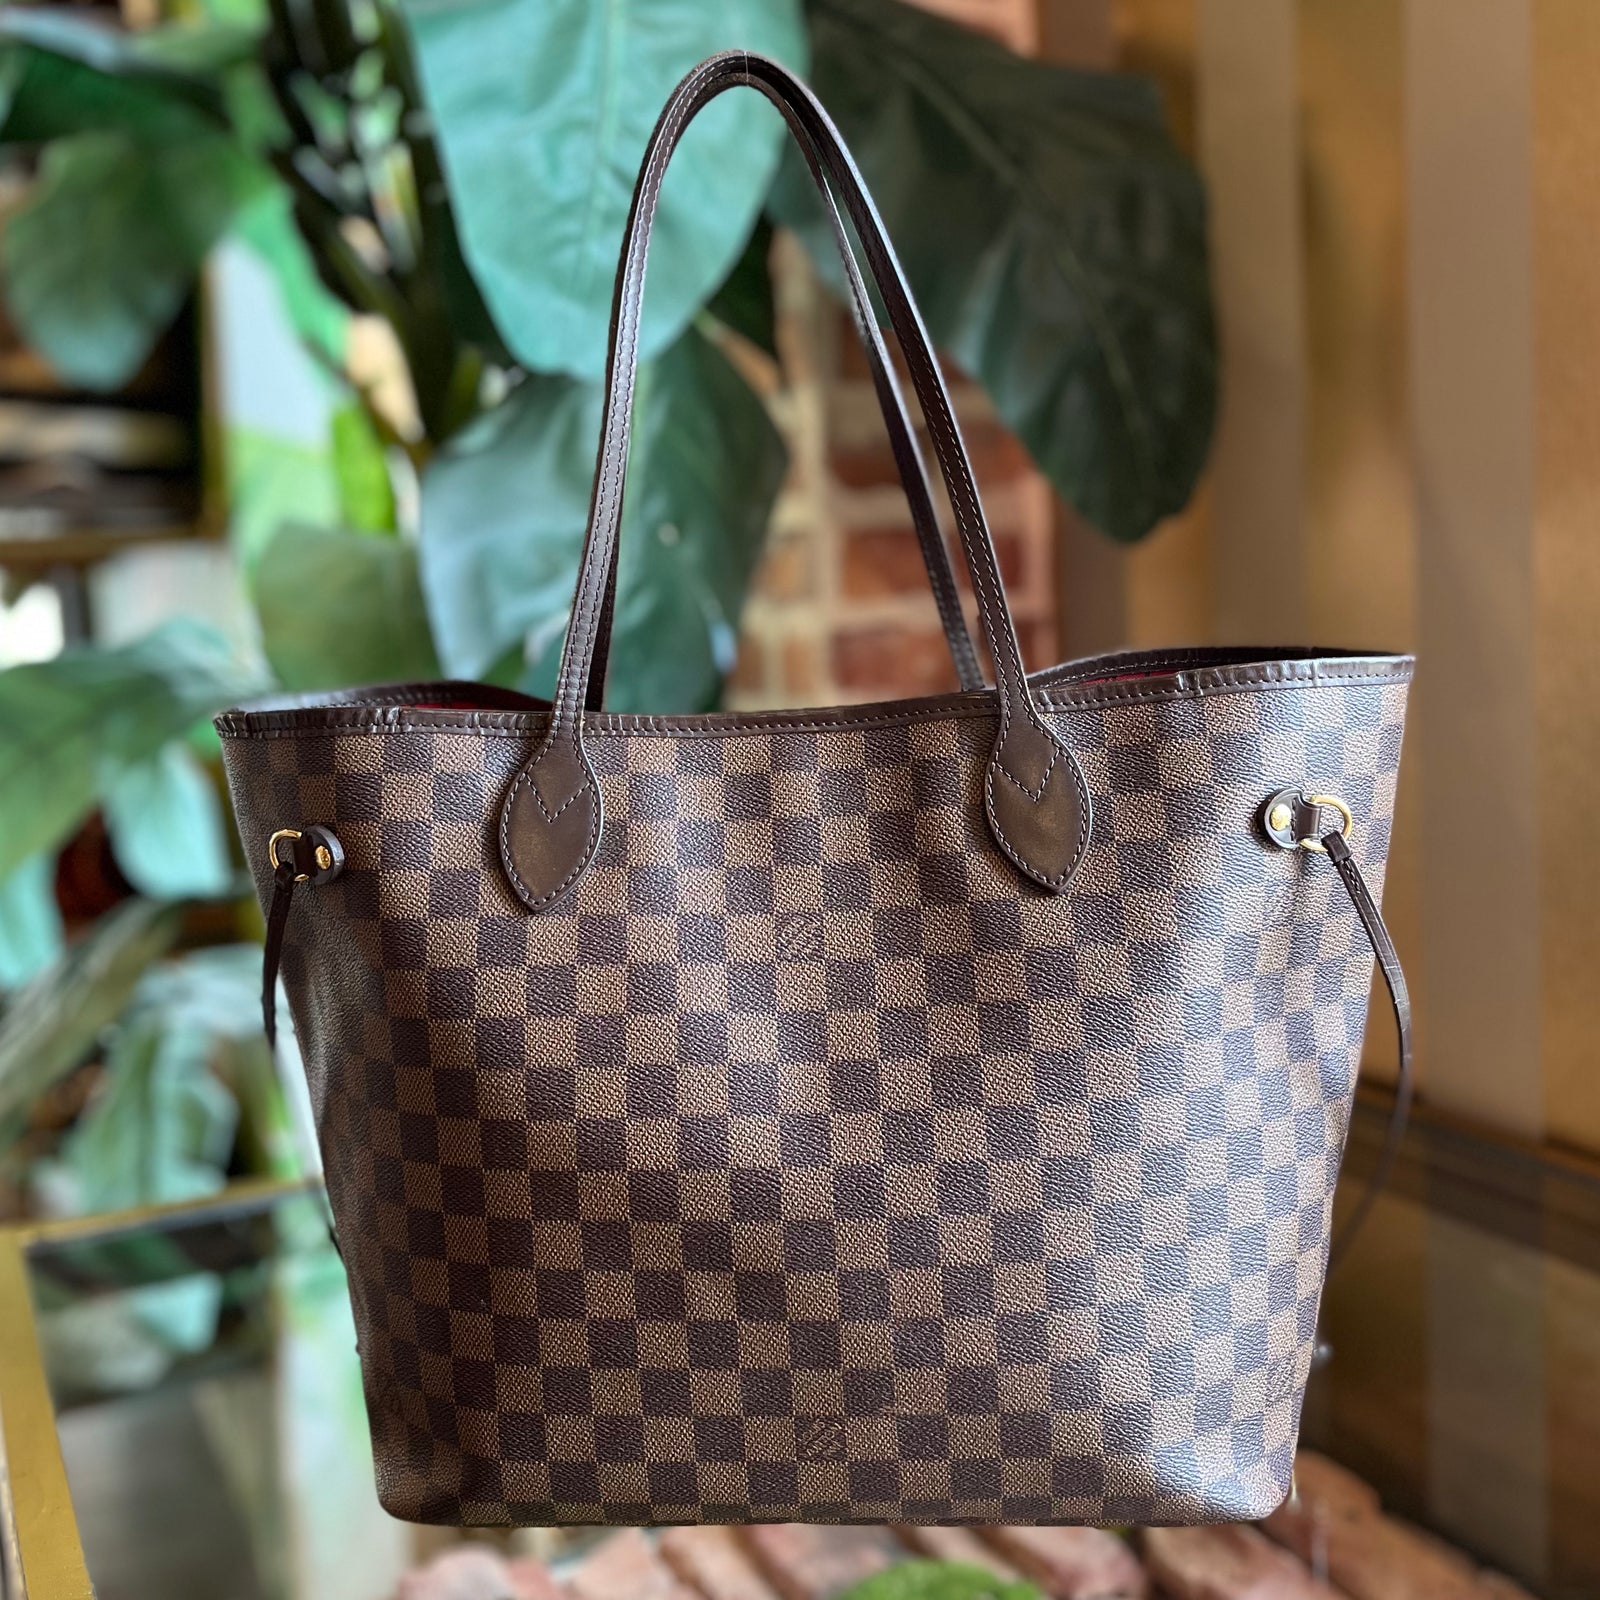 lv neverfull bag accessories